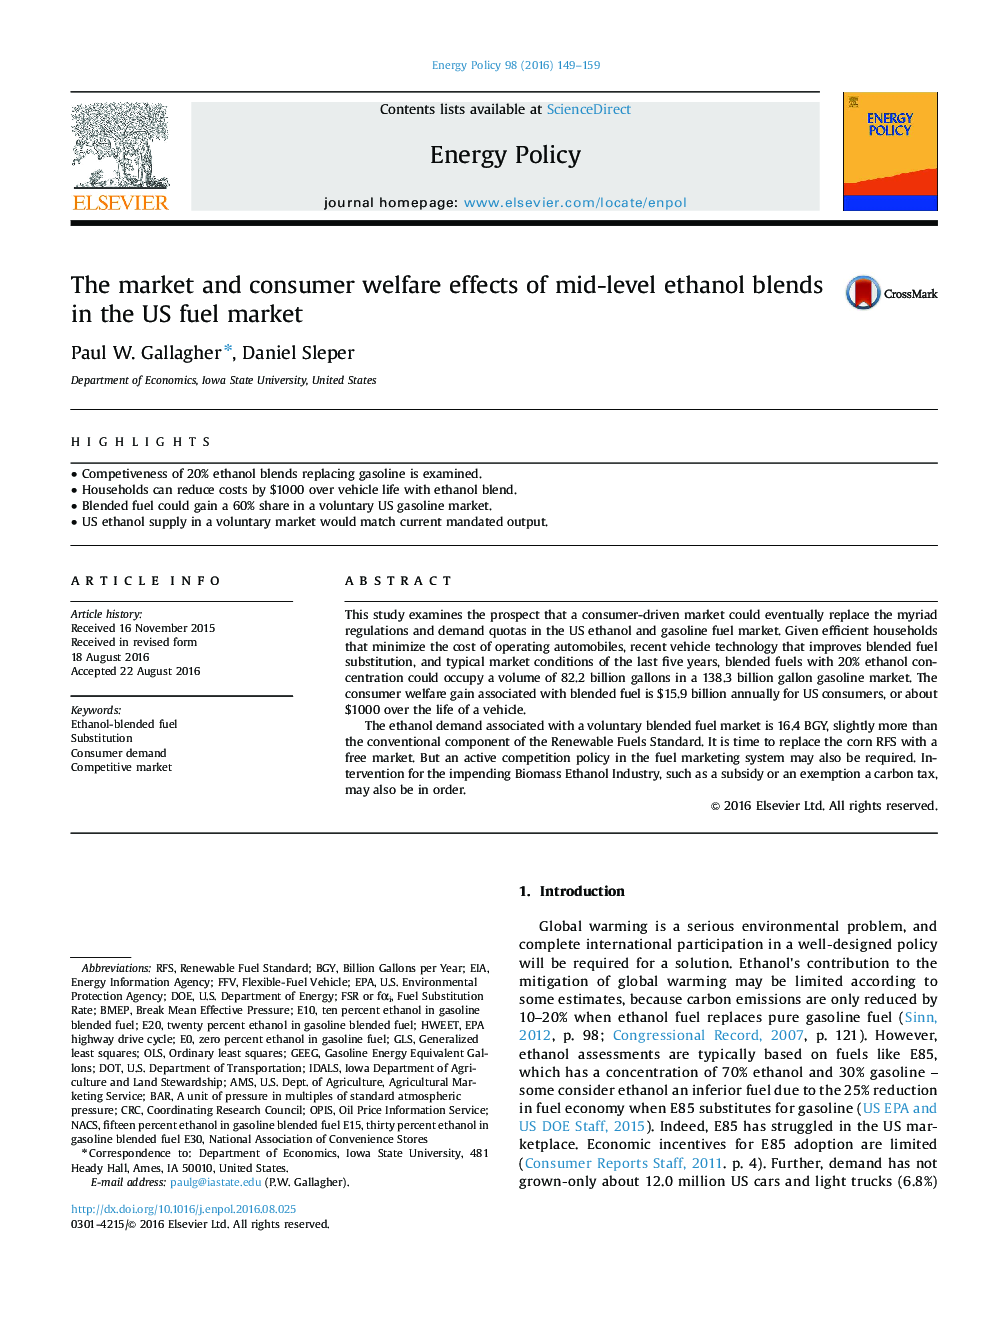 The market and consumer welfare effects of mid-level ethanol blends in the US fuel market